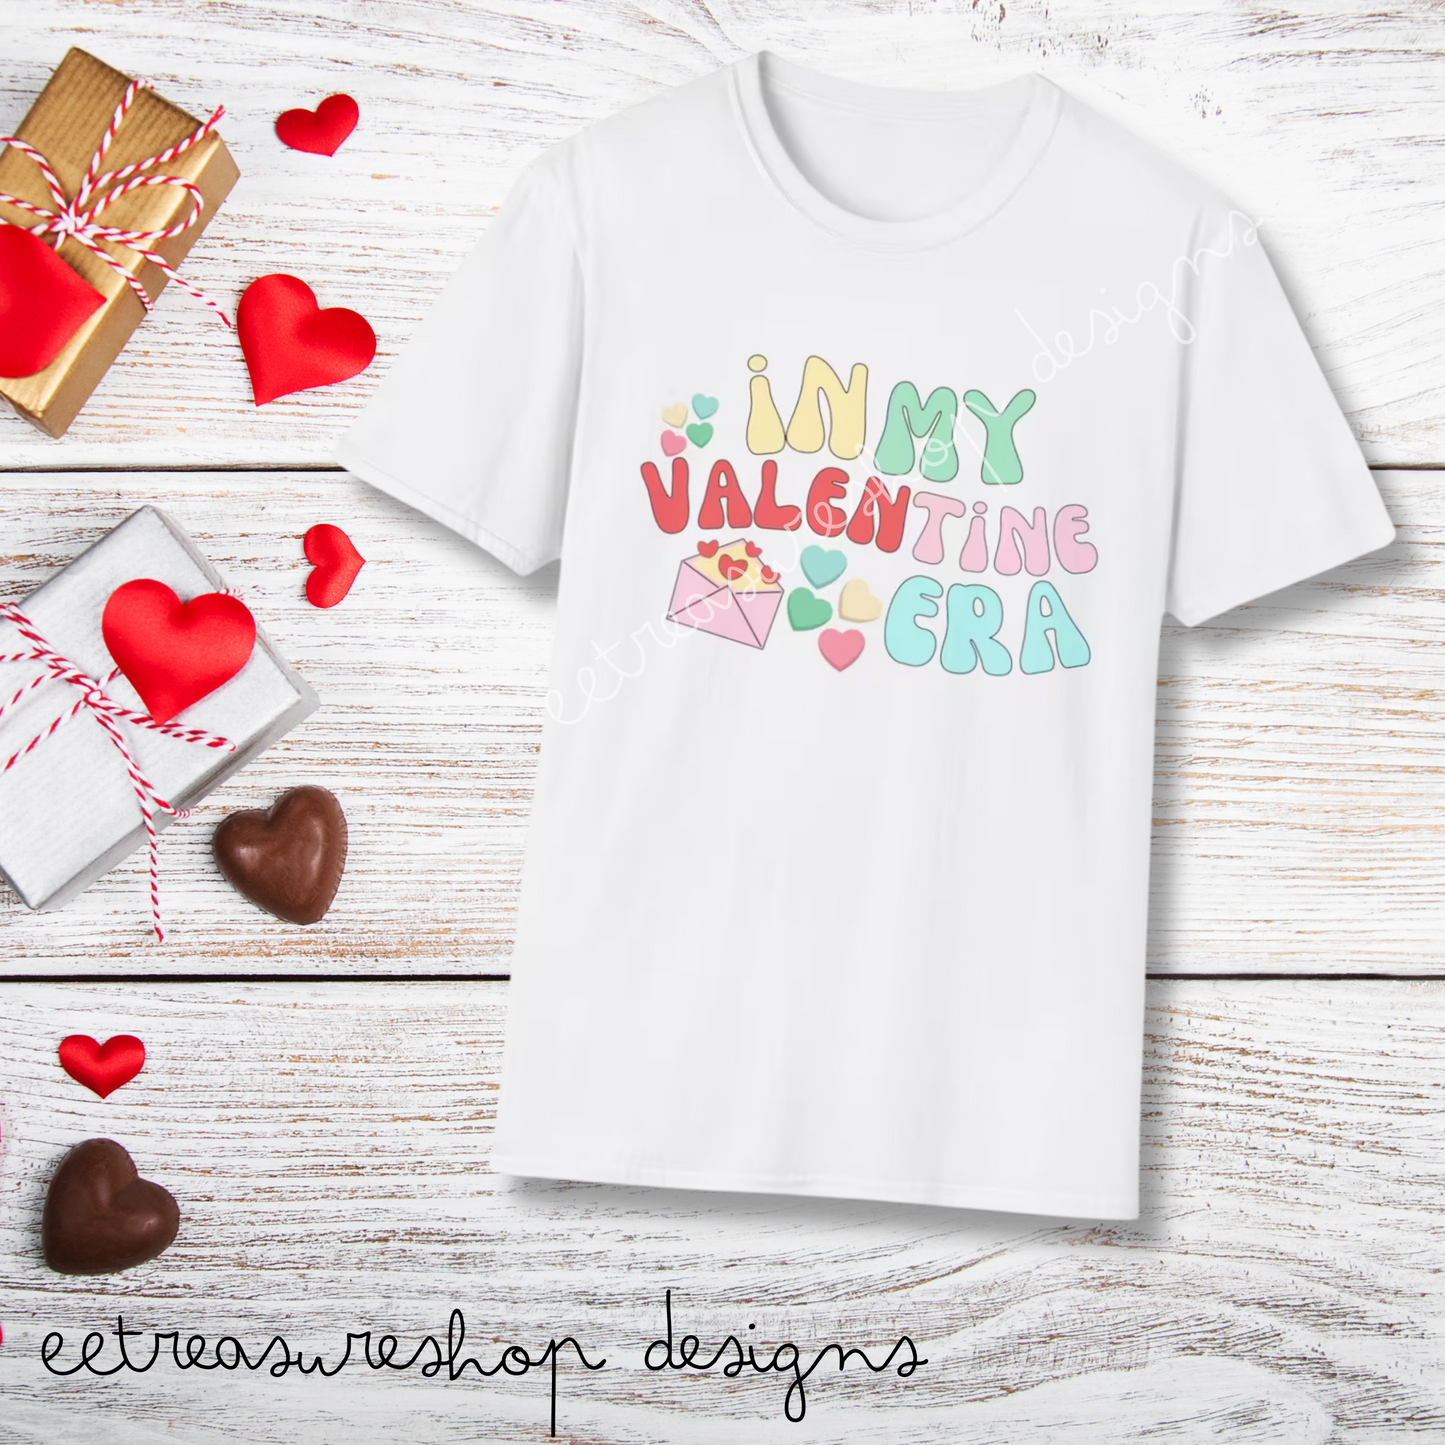 In My Valentine Era Unisex Softstyle T-Shirt, Swiftie Valentines Day T-Shirt, Gift for Her or Him for Valentines Day